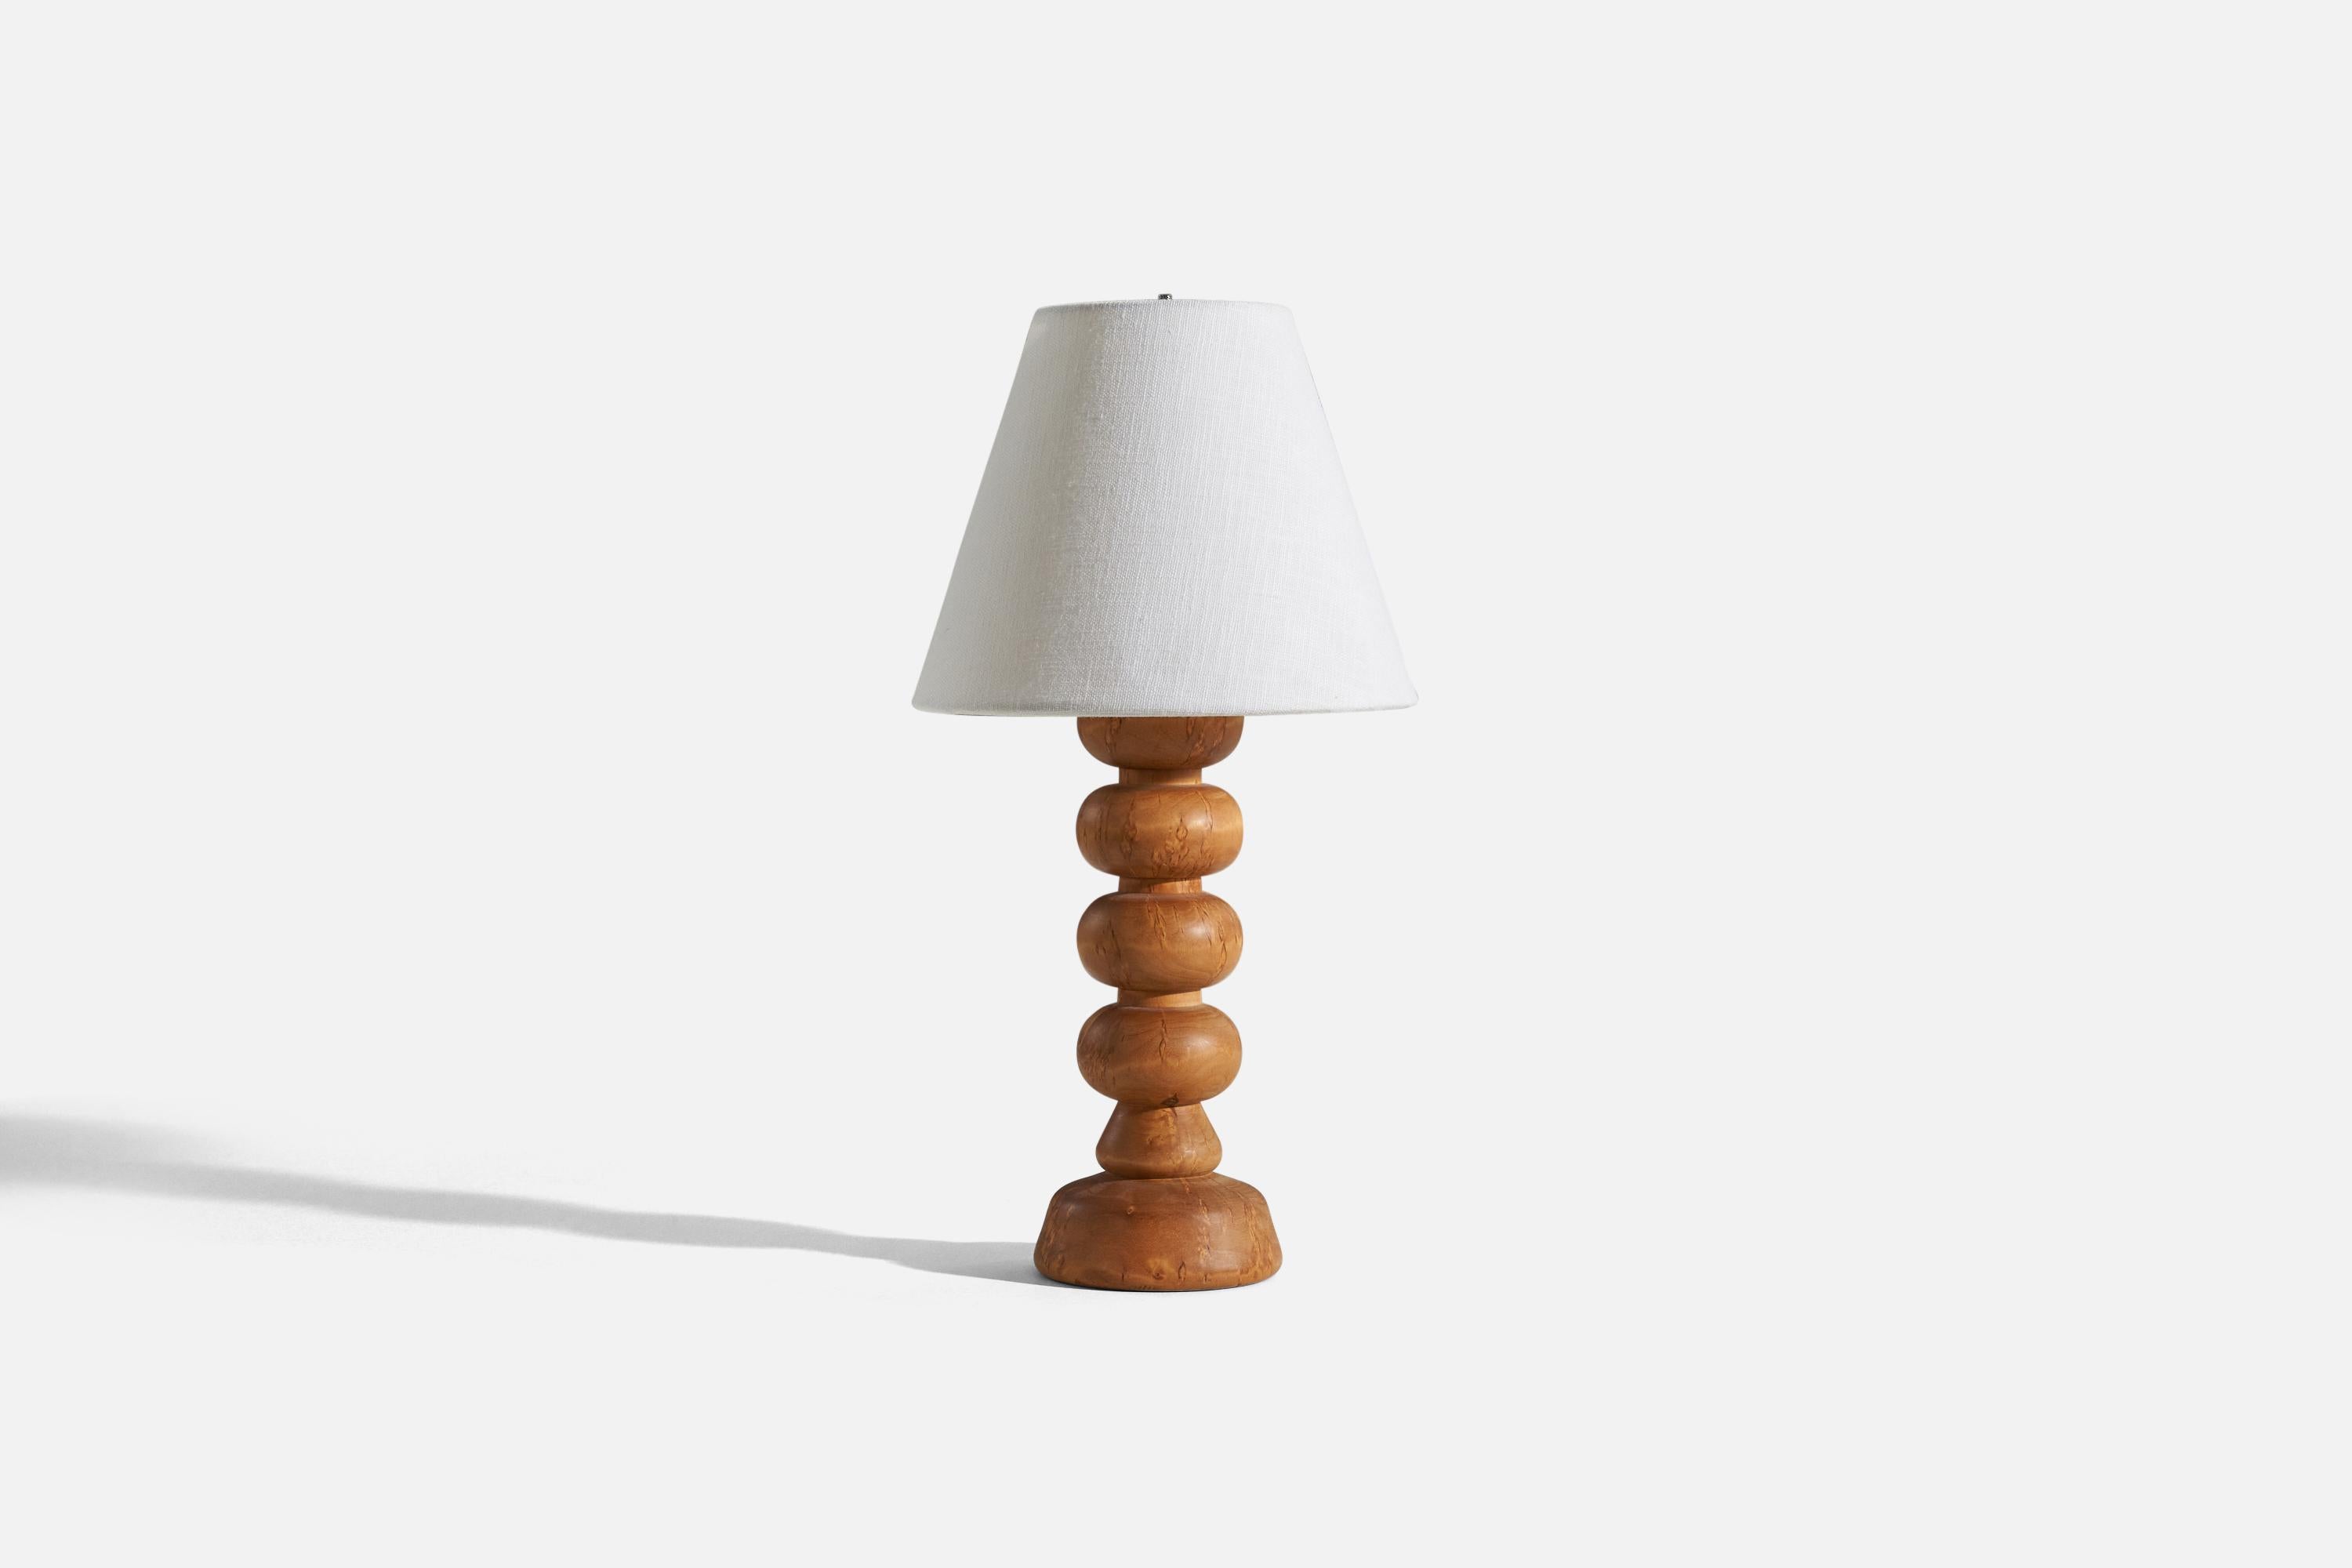 A wooden table lamp, designed and produced by a Swedish designer, Sweden, 1970s.

Sold without lampshade. 
Dimensions of Lamp (inches) : 12 x 4 x 4 (H x W x D)
Dimensions of Shade (inches) : 4 x 8 x 6.75 (T x B x H)
Dimension of Lamp with Shade